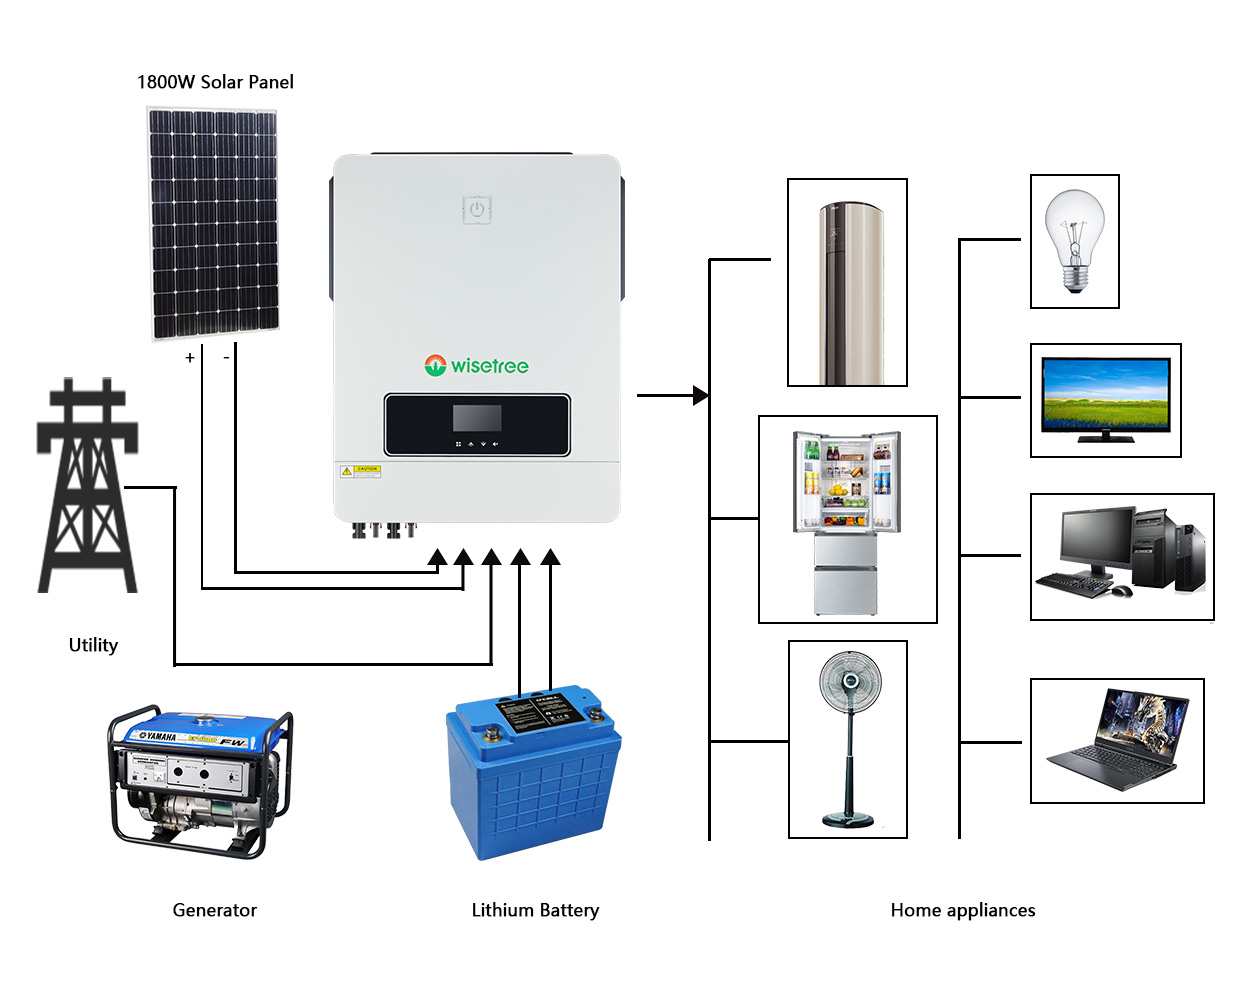 It can effectively integrate solar panels and grid power to provide users with a more stable and reliable power supply.